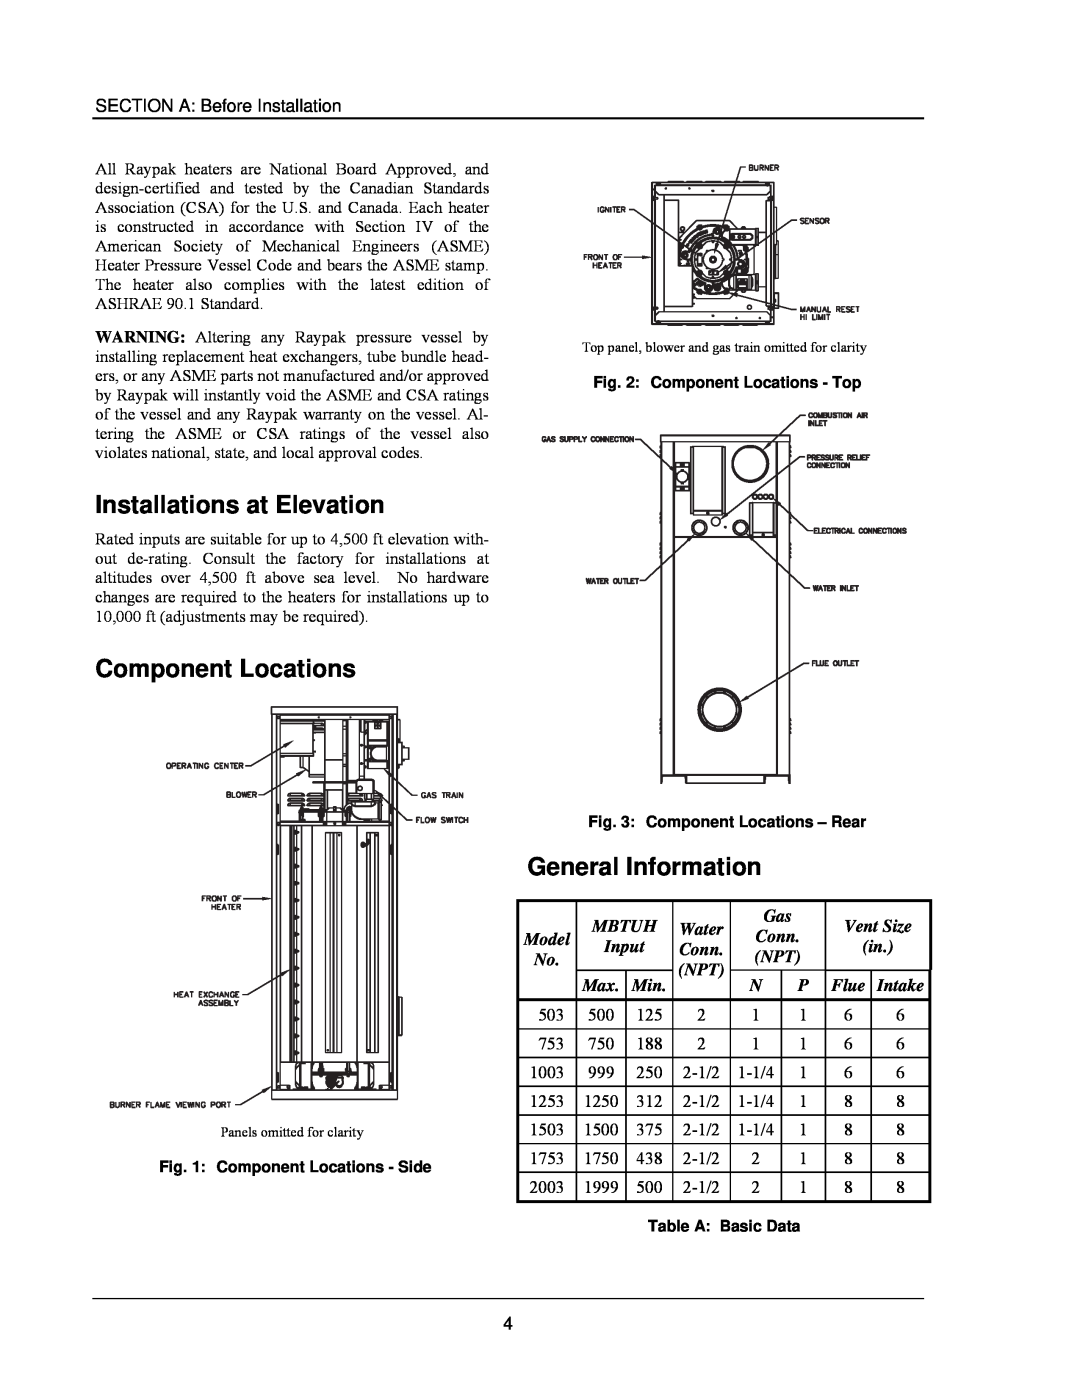 Raypak 503-2003 manual Installations at Elevation, Component Locations, General Information 